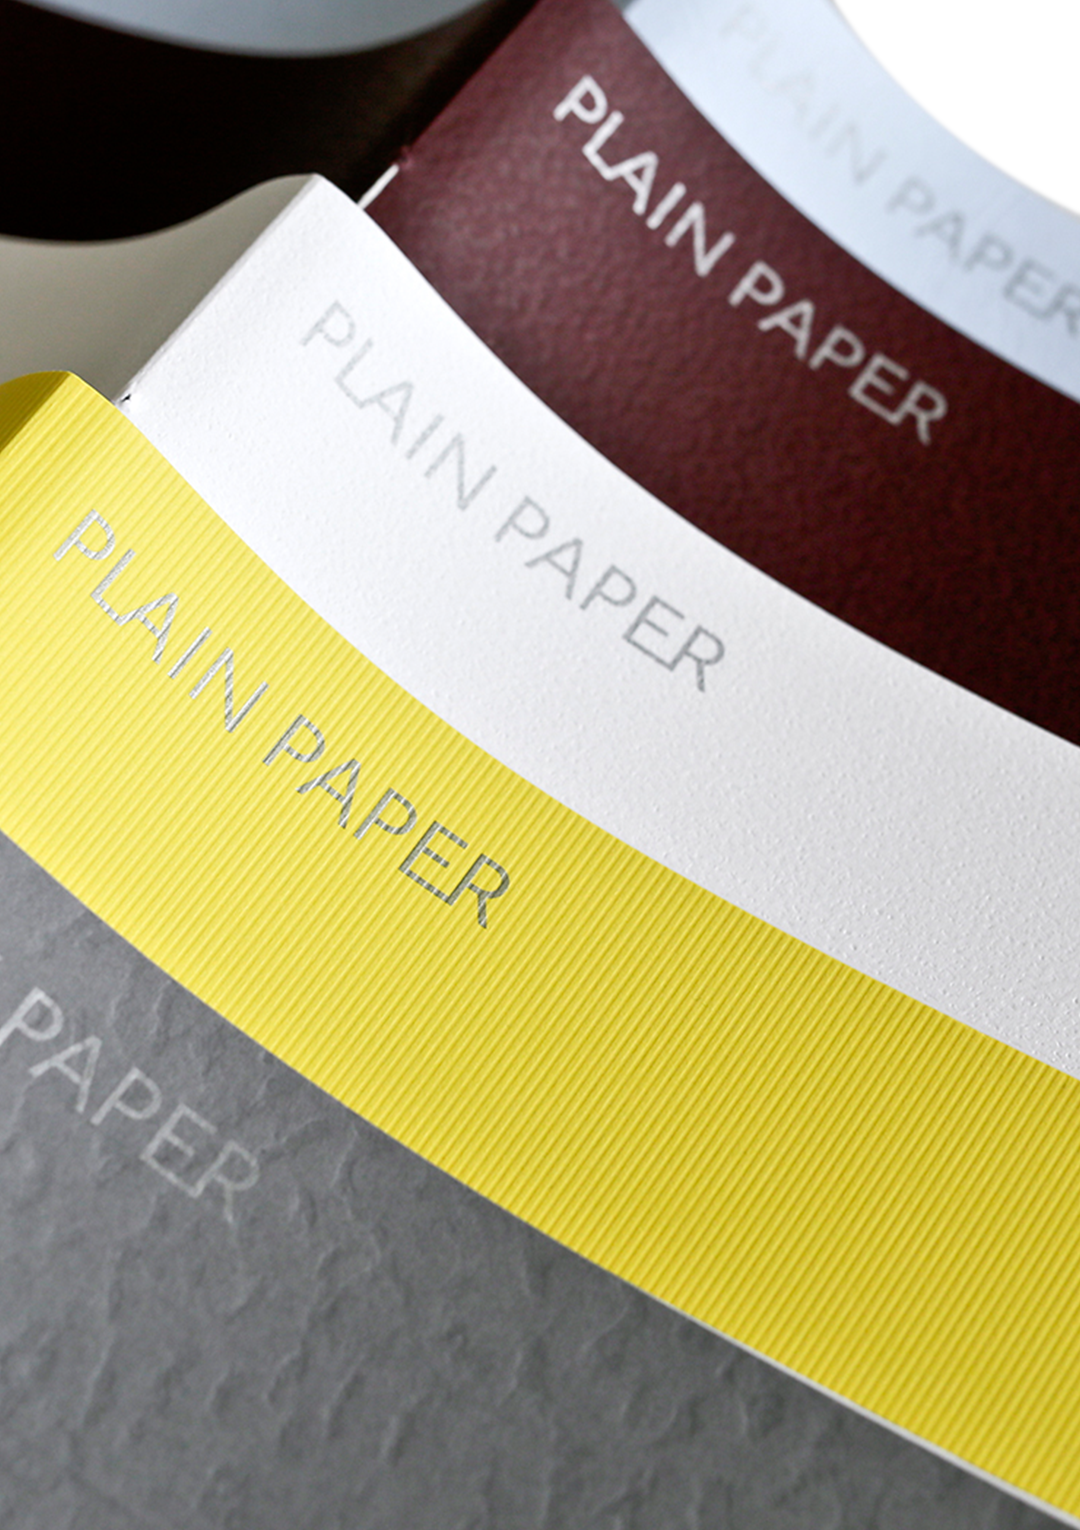 Plain Paper: The Surface Issue